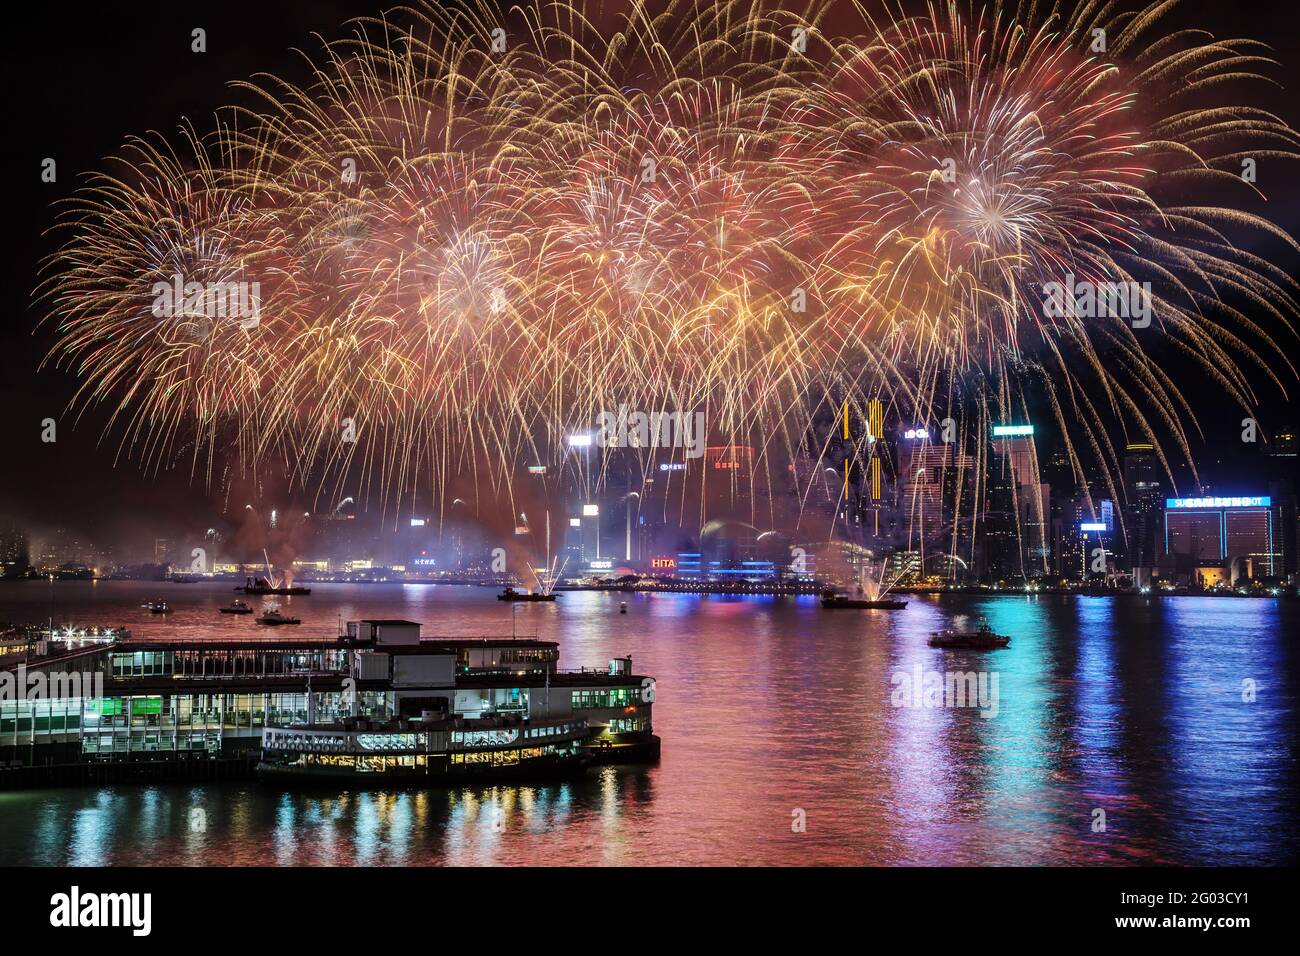 Spectacular national day fireworks display above Victoria Harbour. Photo taken from Harbour City, Tsim Sha Tsui. Stock Photo